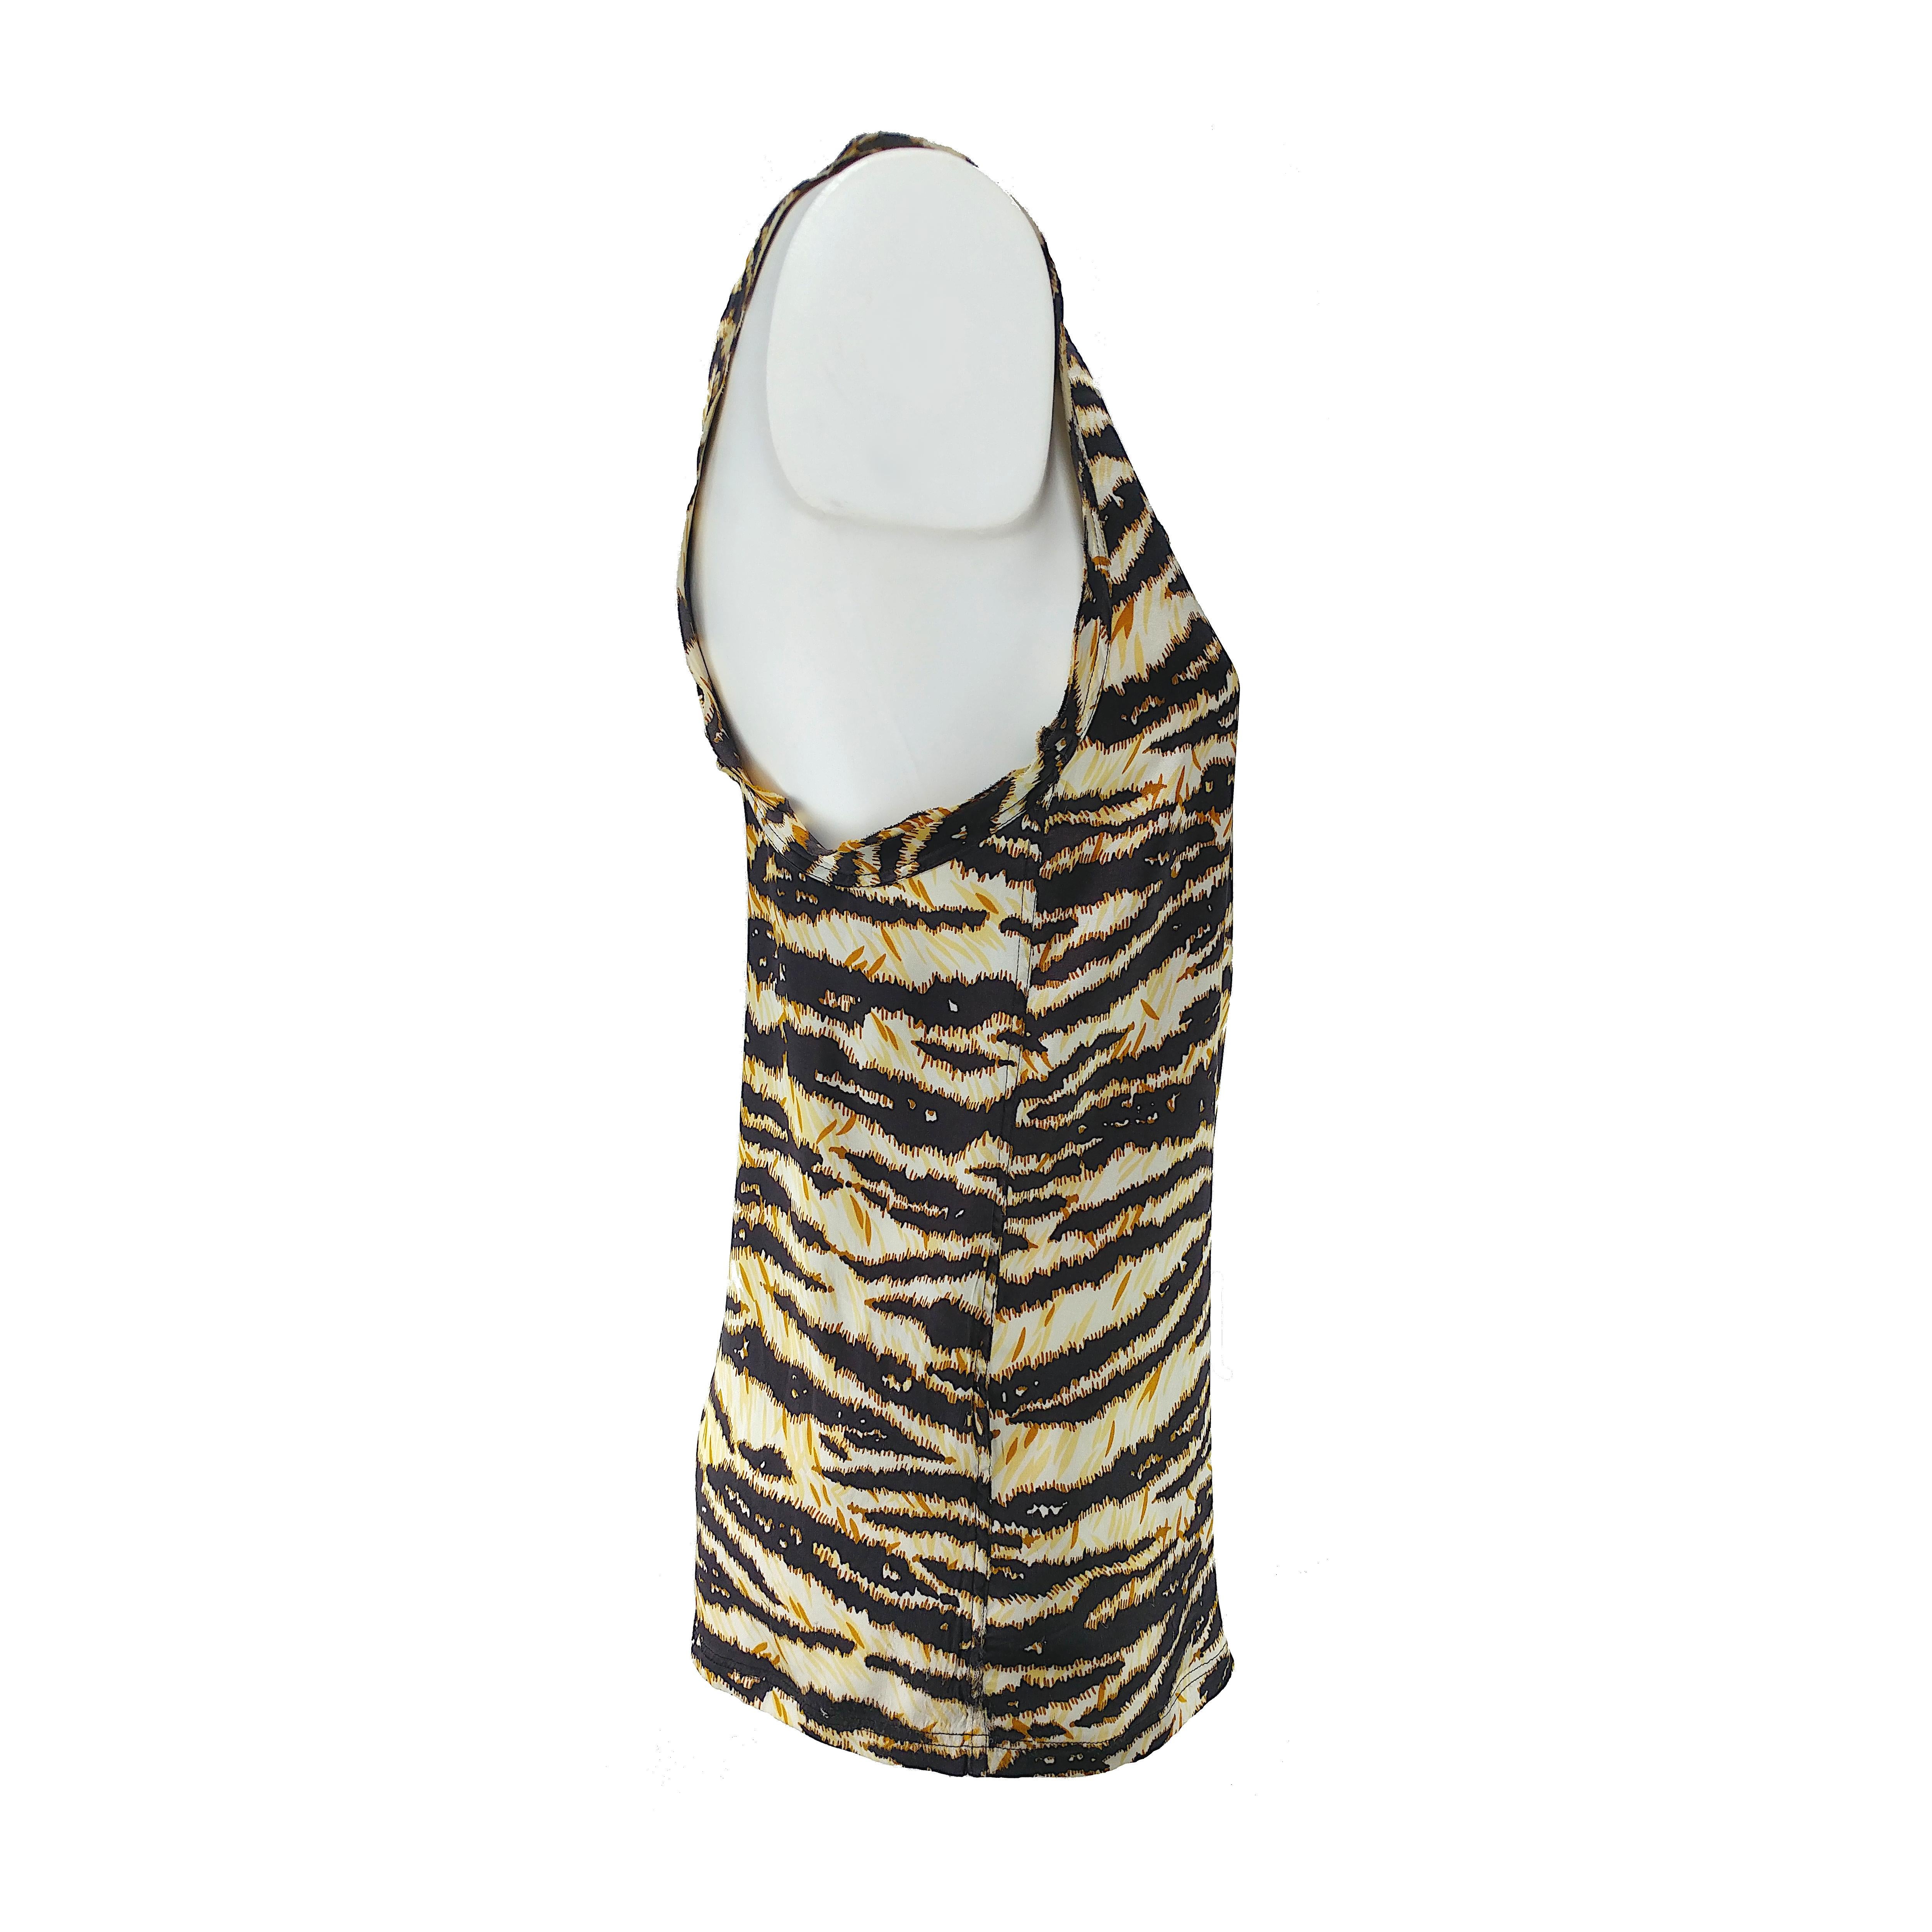 The iconic tiger print by Dolce & Gabbana is the main theme of this tank top, which features a soft silk fabric and ruffled neckline. This summer top is super comfortable and fresh and it comes in excellent conditions with no signs of wear.

About